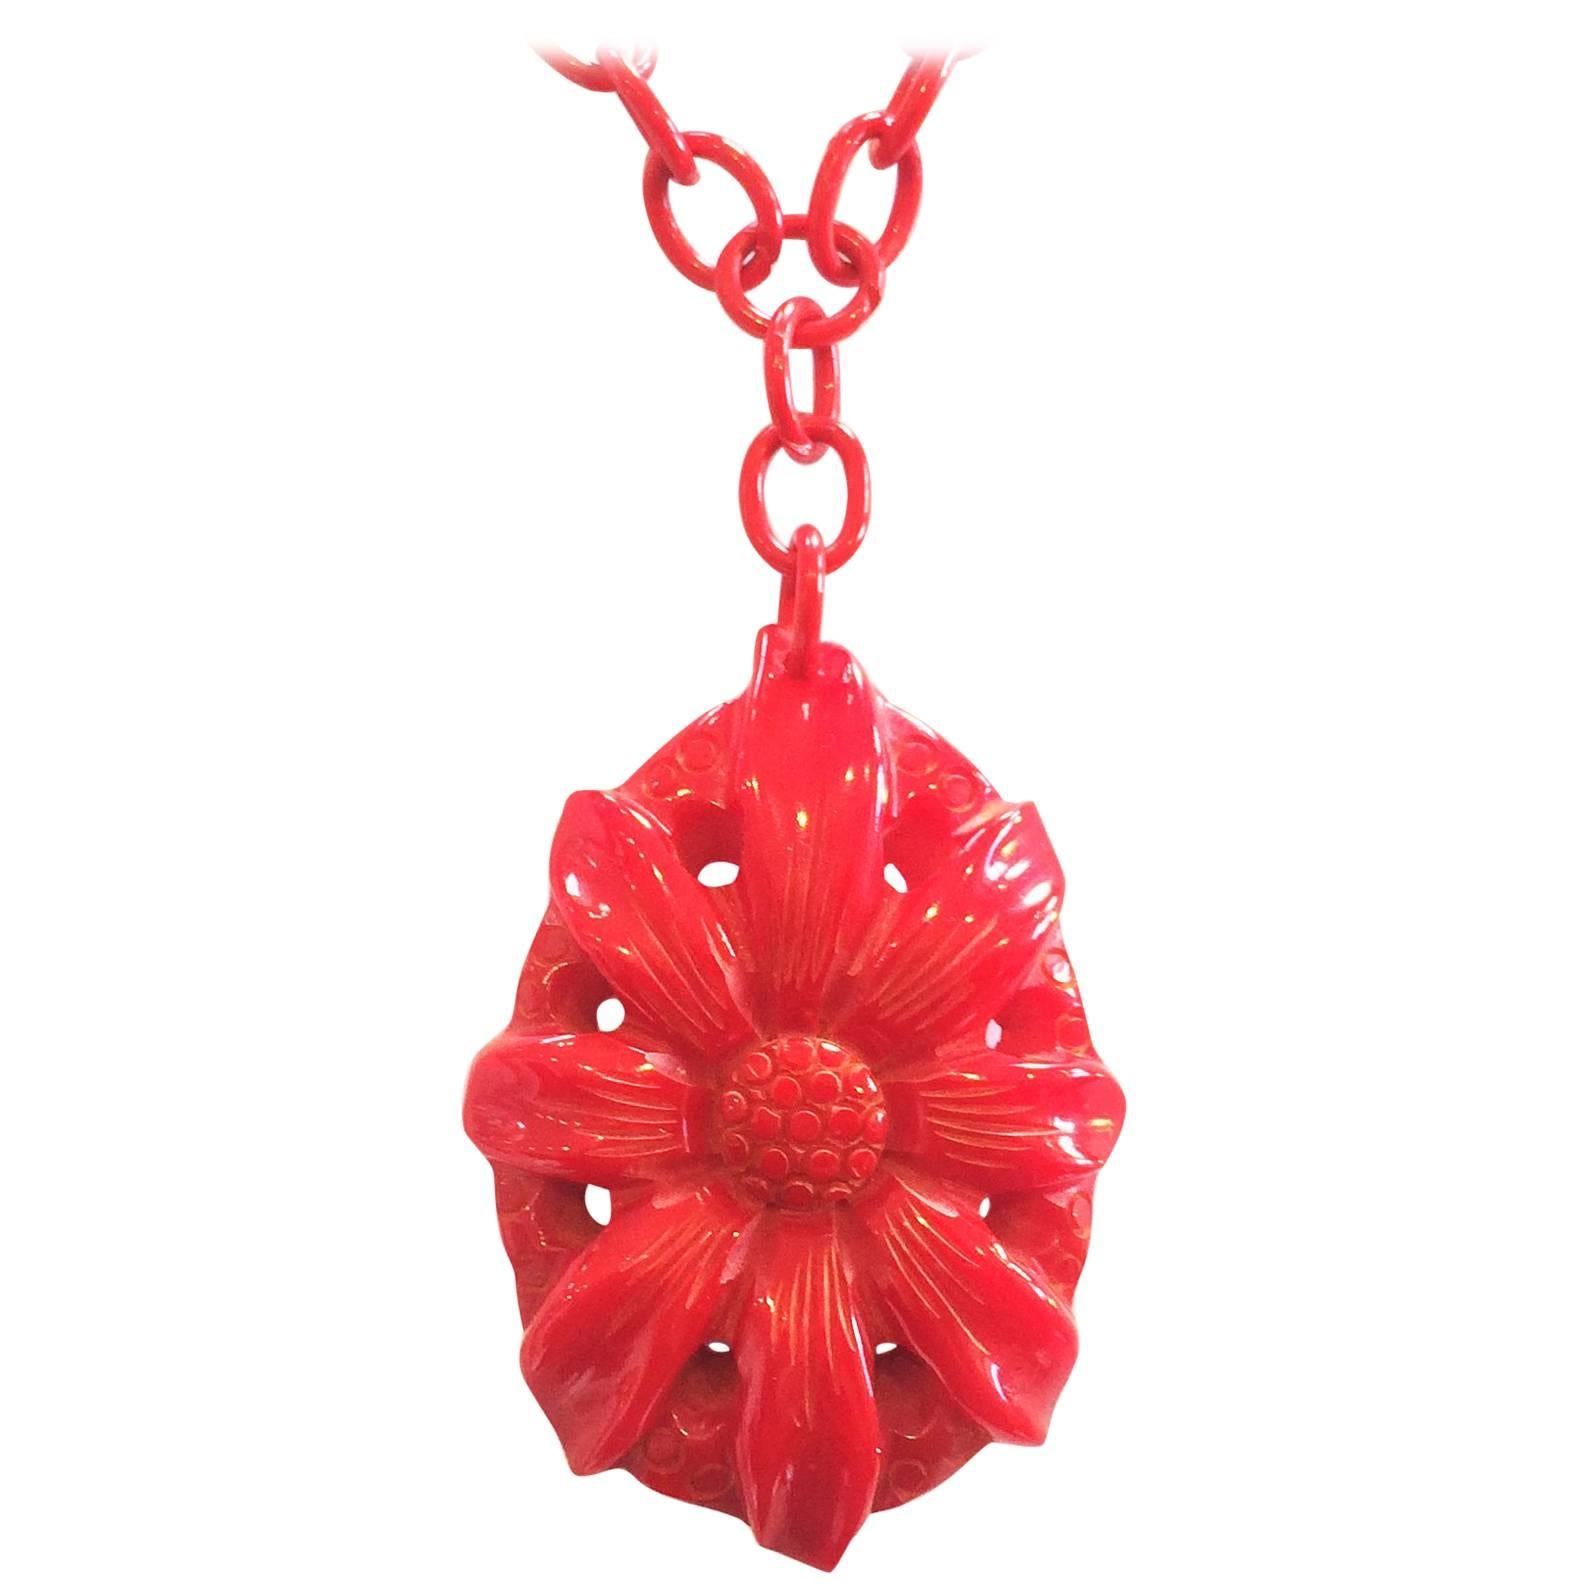 Art Deco heavily carved red bakelite pendant necklace on celluloid chain